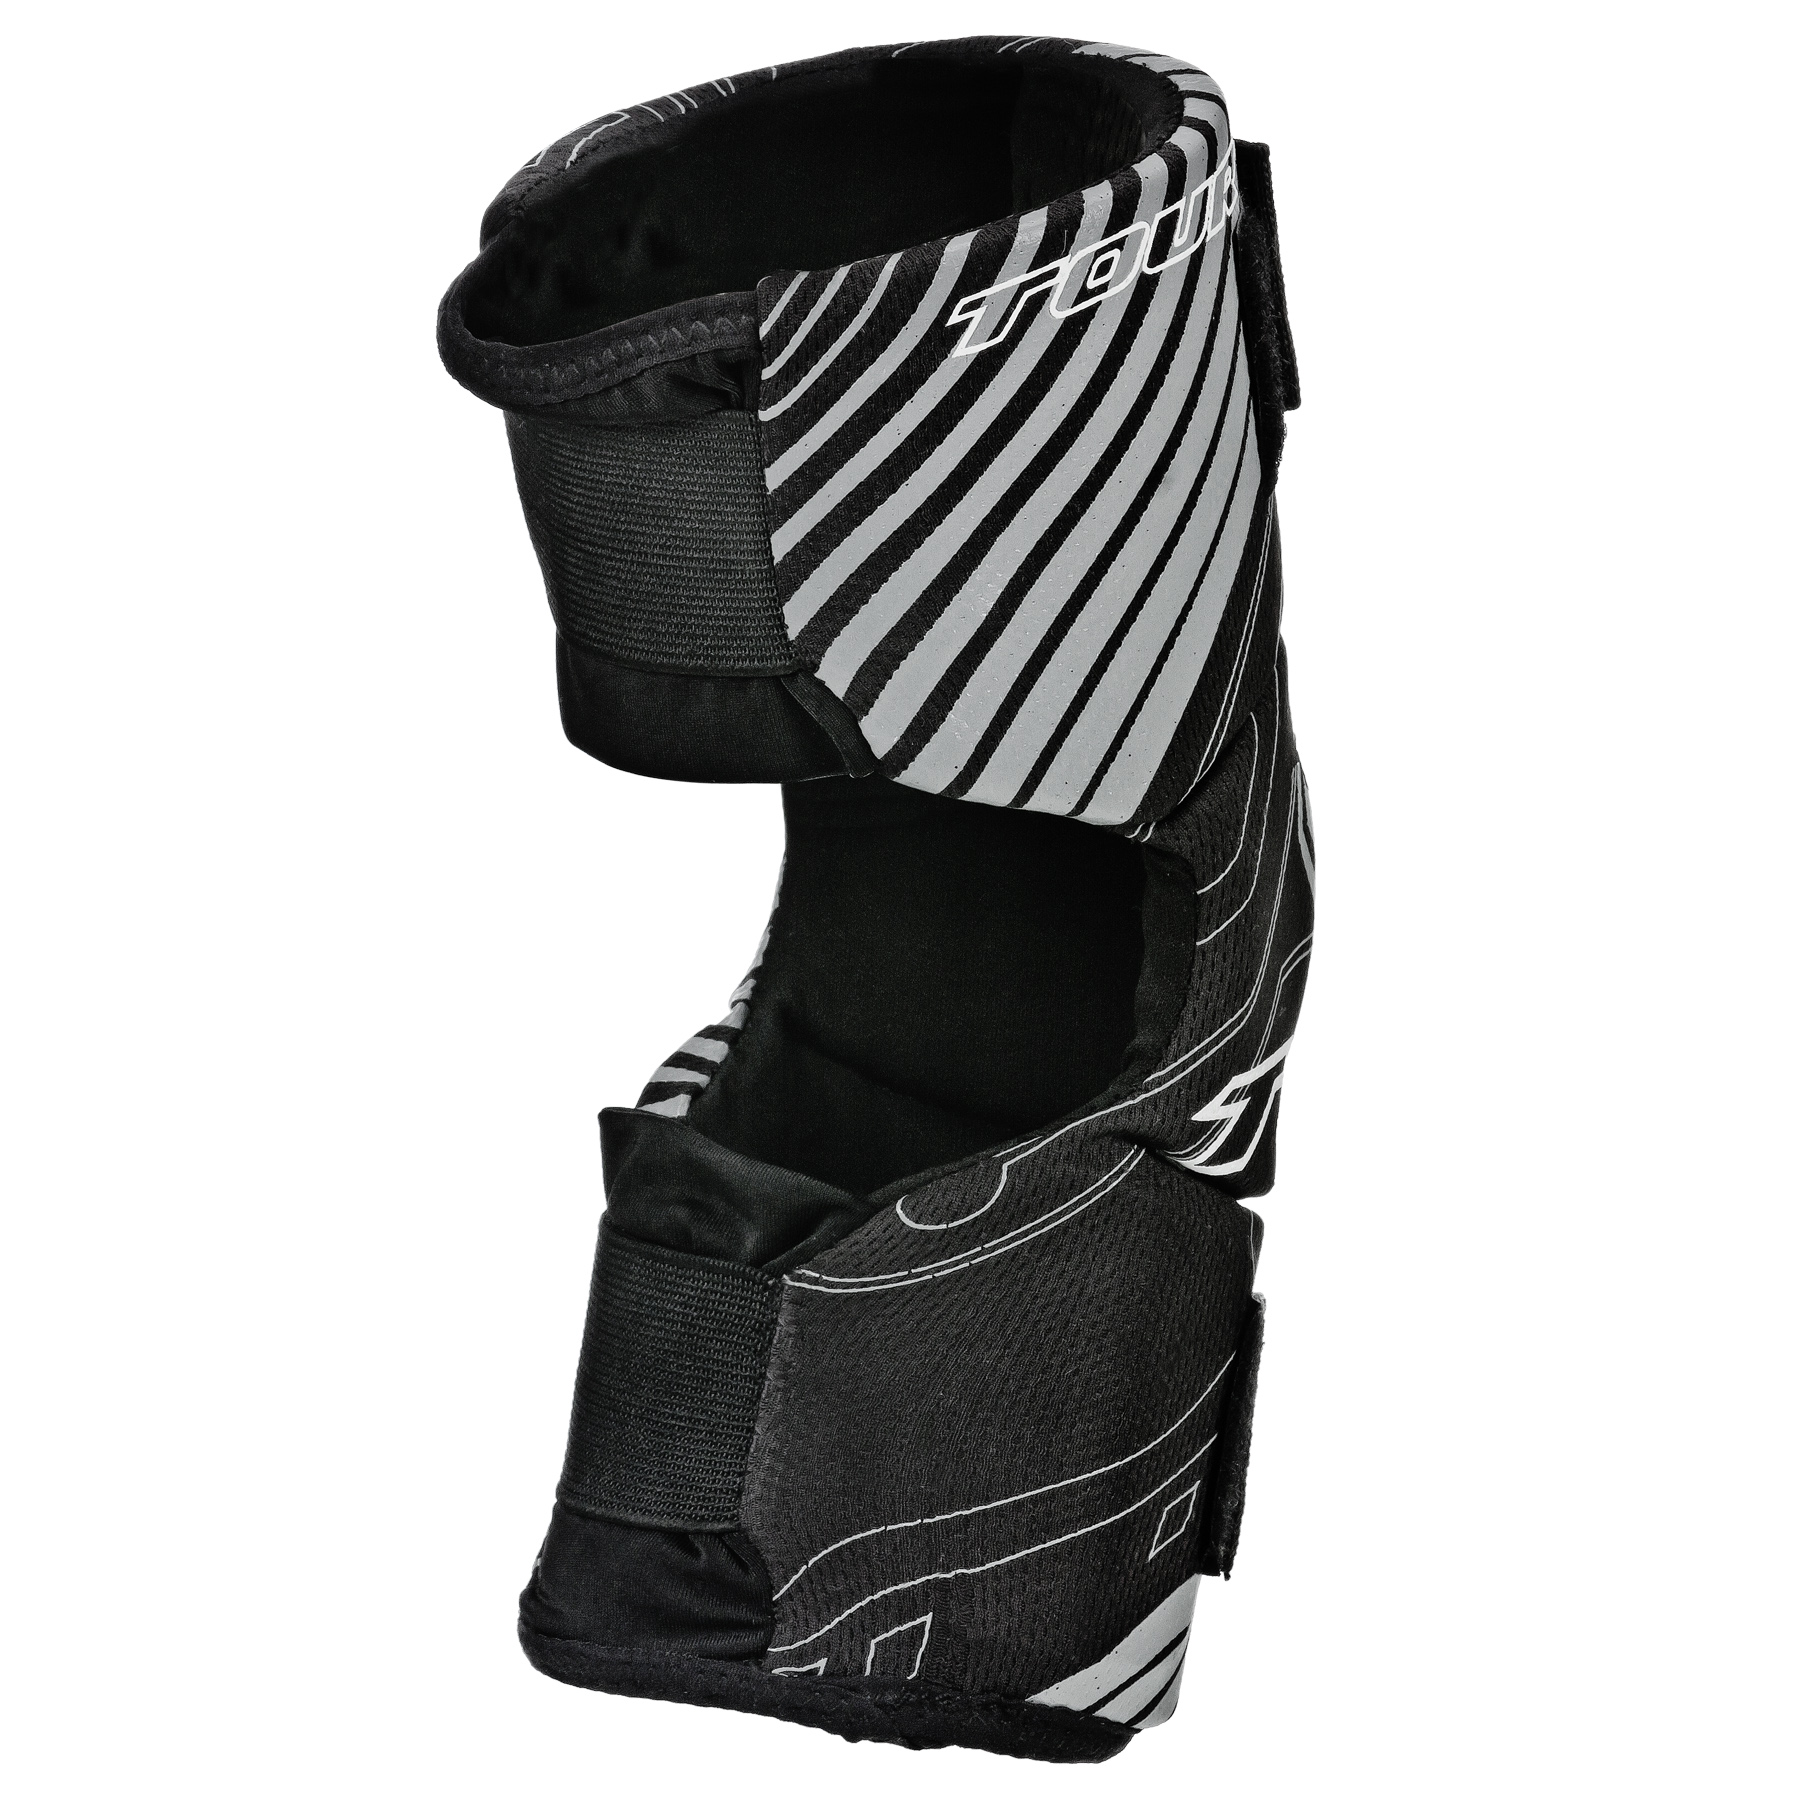 
ELBOW PADS CODE ACTIV YOUTH